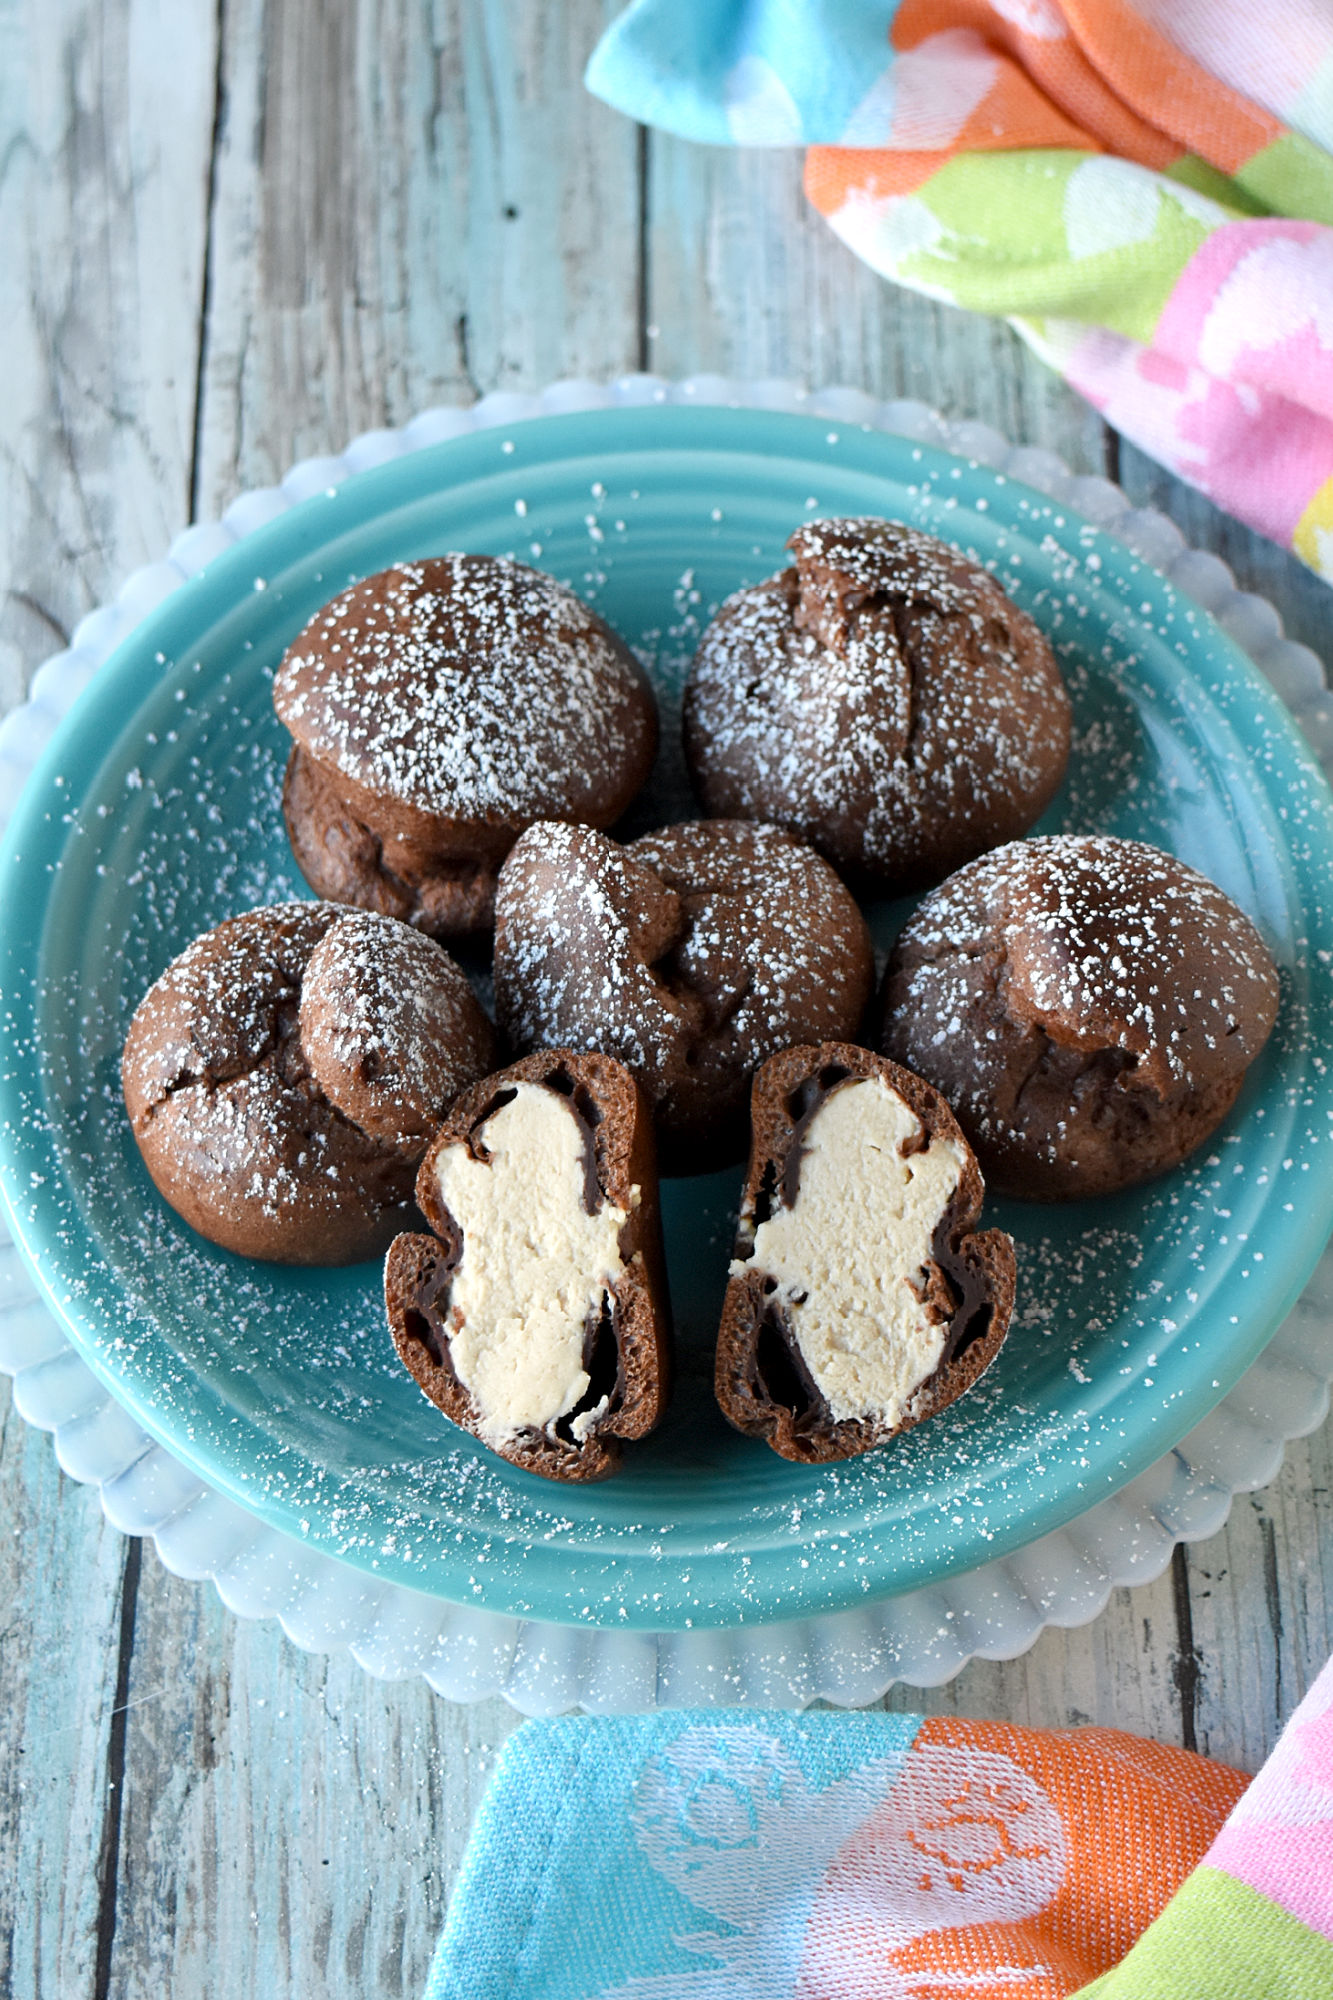 Mocha Cream Puffs are chocolaty, light, and perfectly delicious. Especially with the tiramisu style coffee mascarpone filling. #SpringSweetsWeek